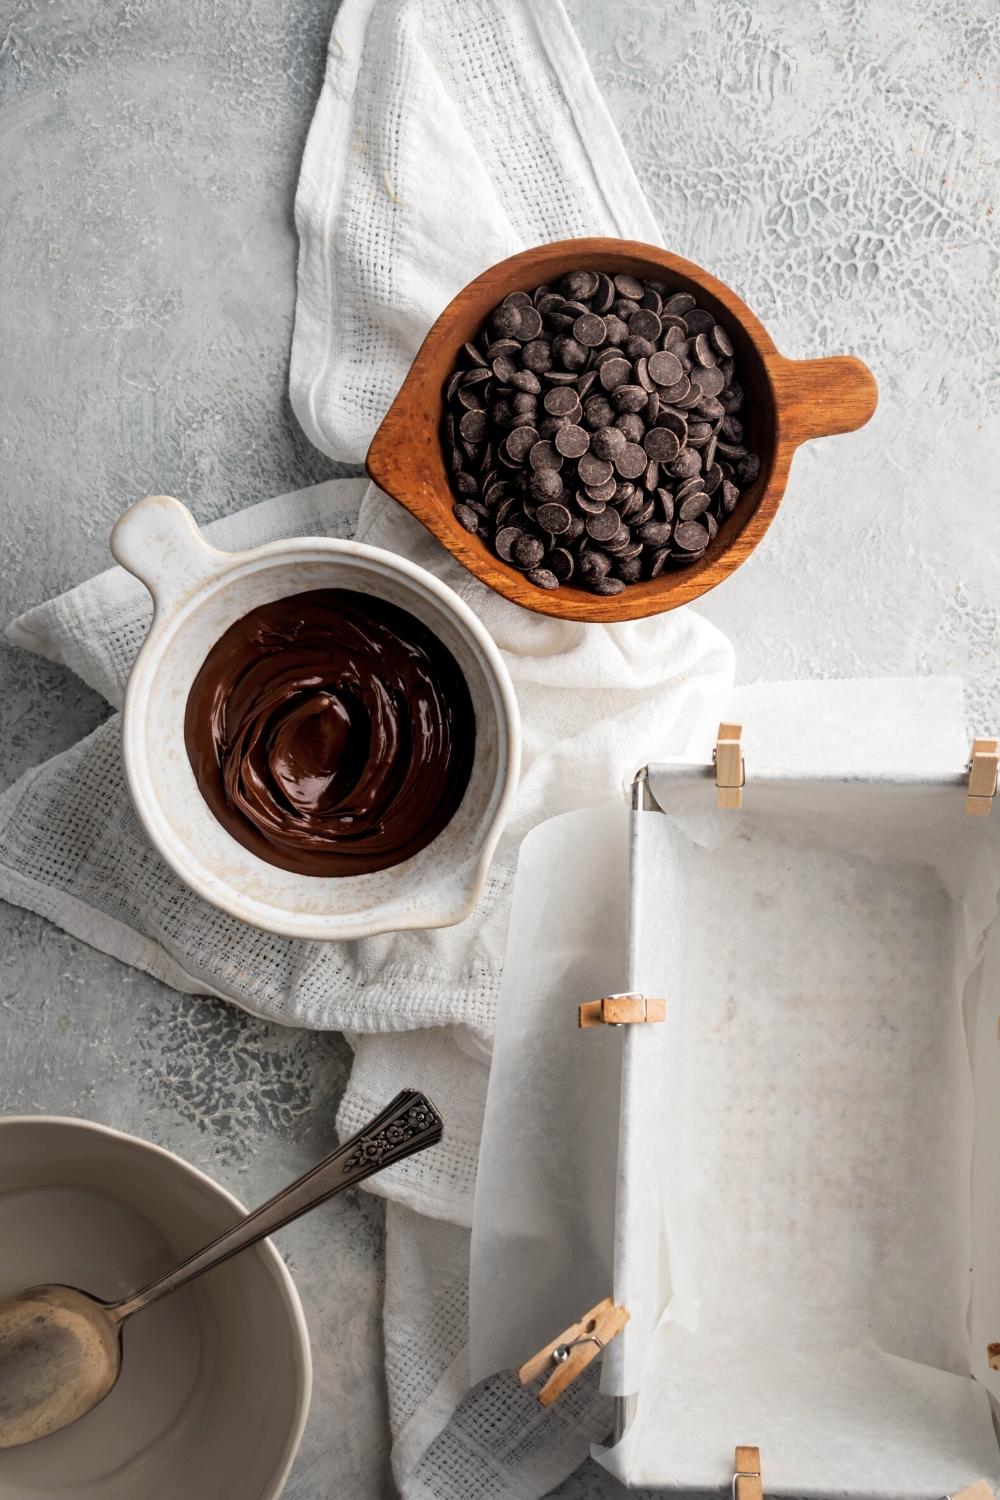 A wooden bowl of chocolate chips and a white bowl of Nutella on a white cloth on top of a grey counter.